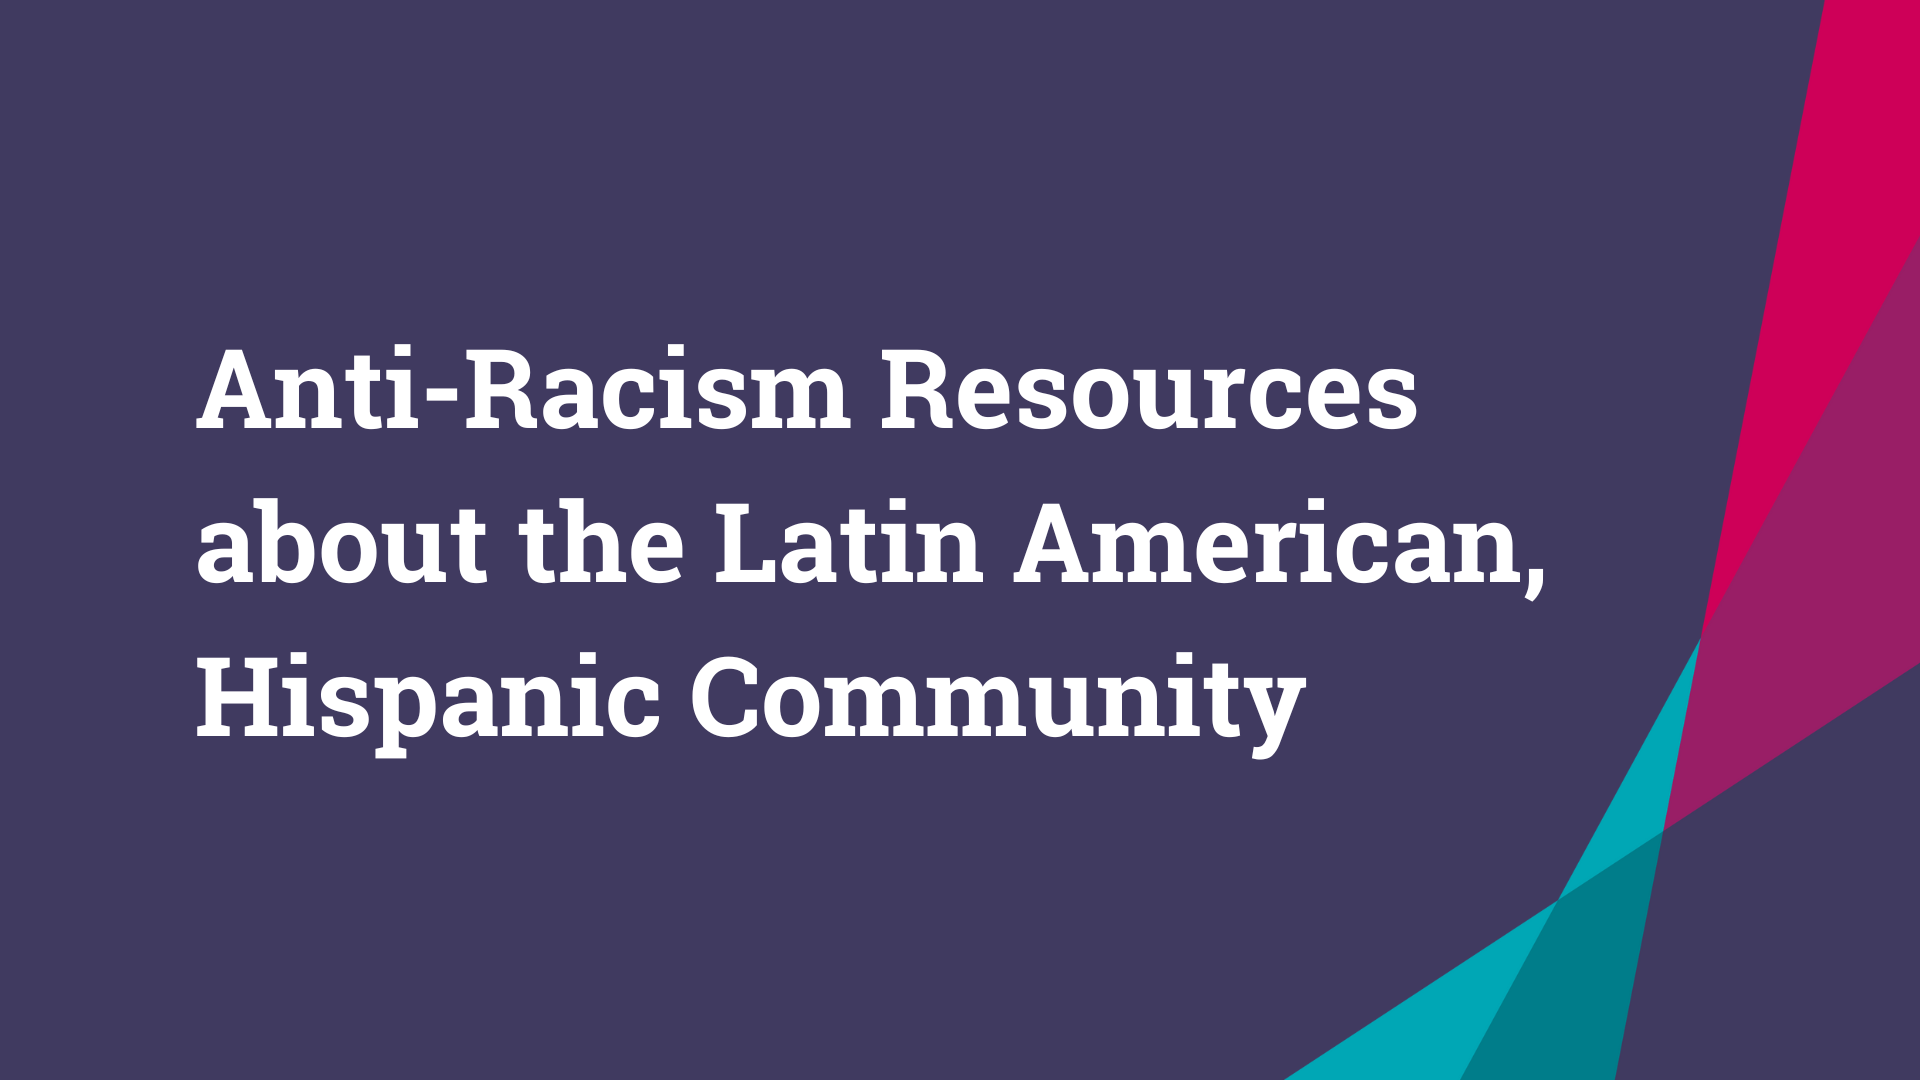 Anti-Racism Resources for Latin Americans and Hispanics